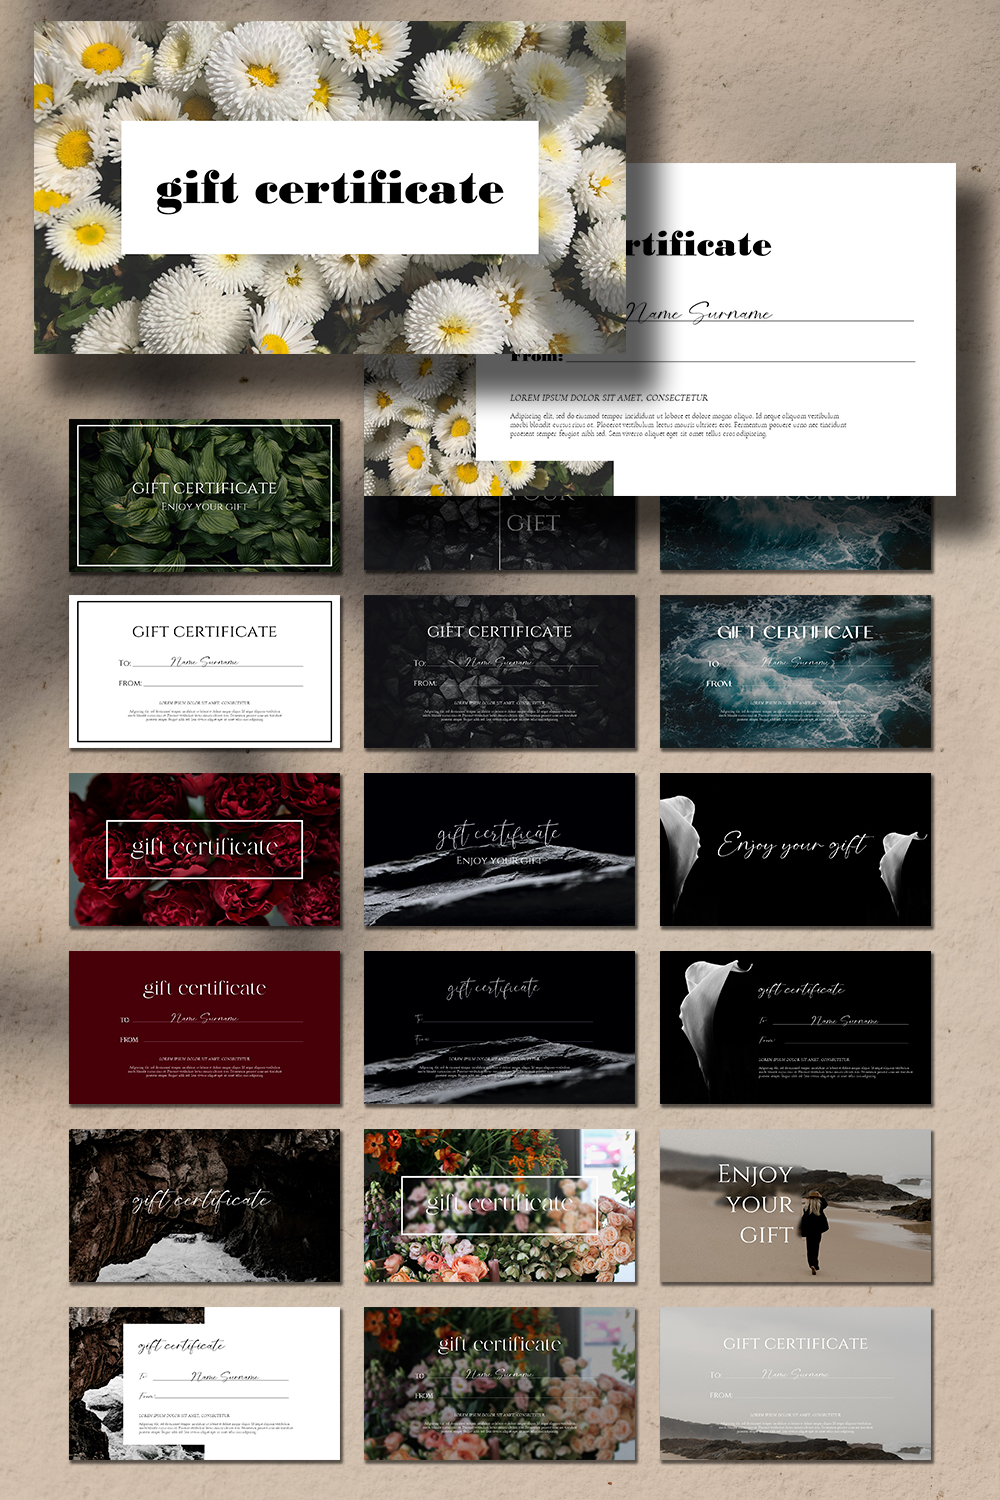 Pinterest images gift certificate template powerpoint.